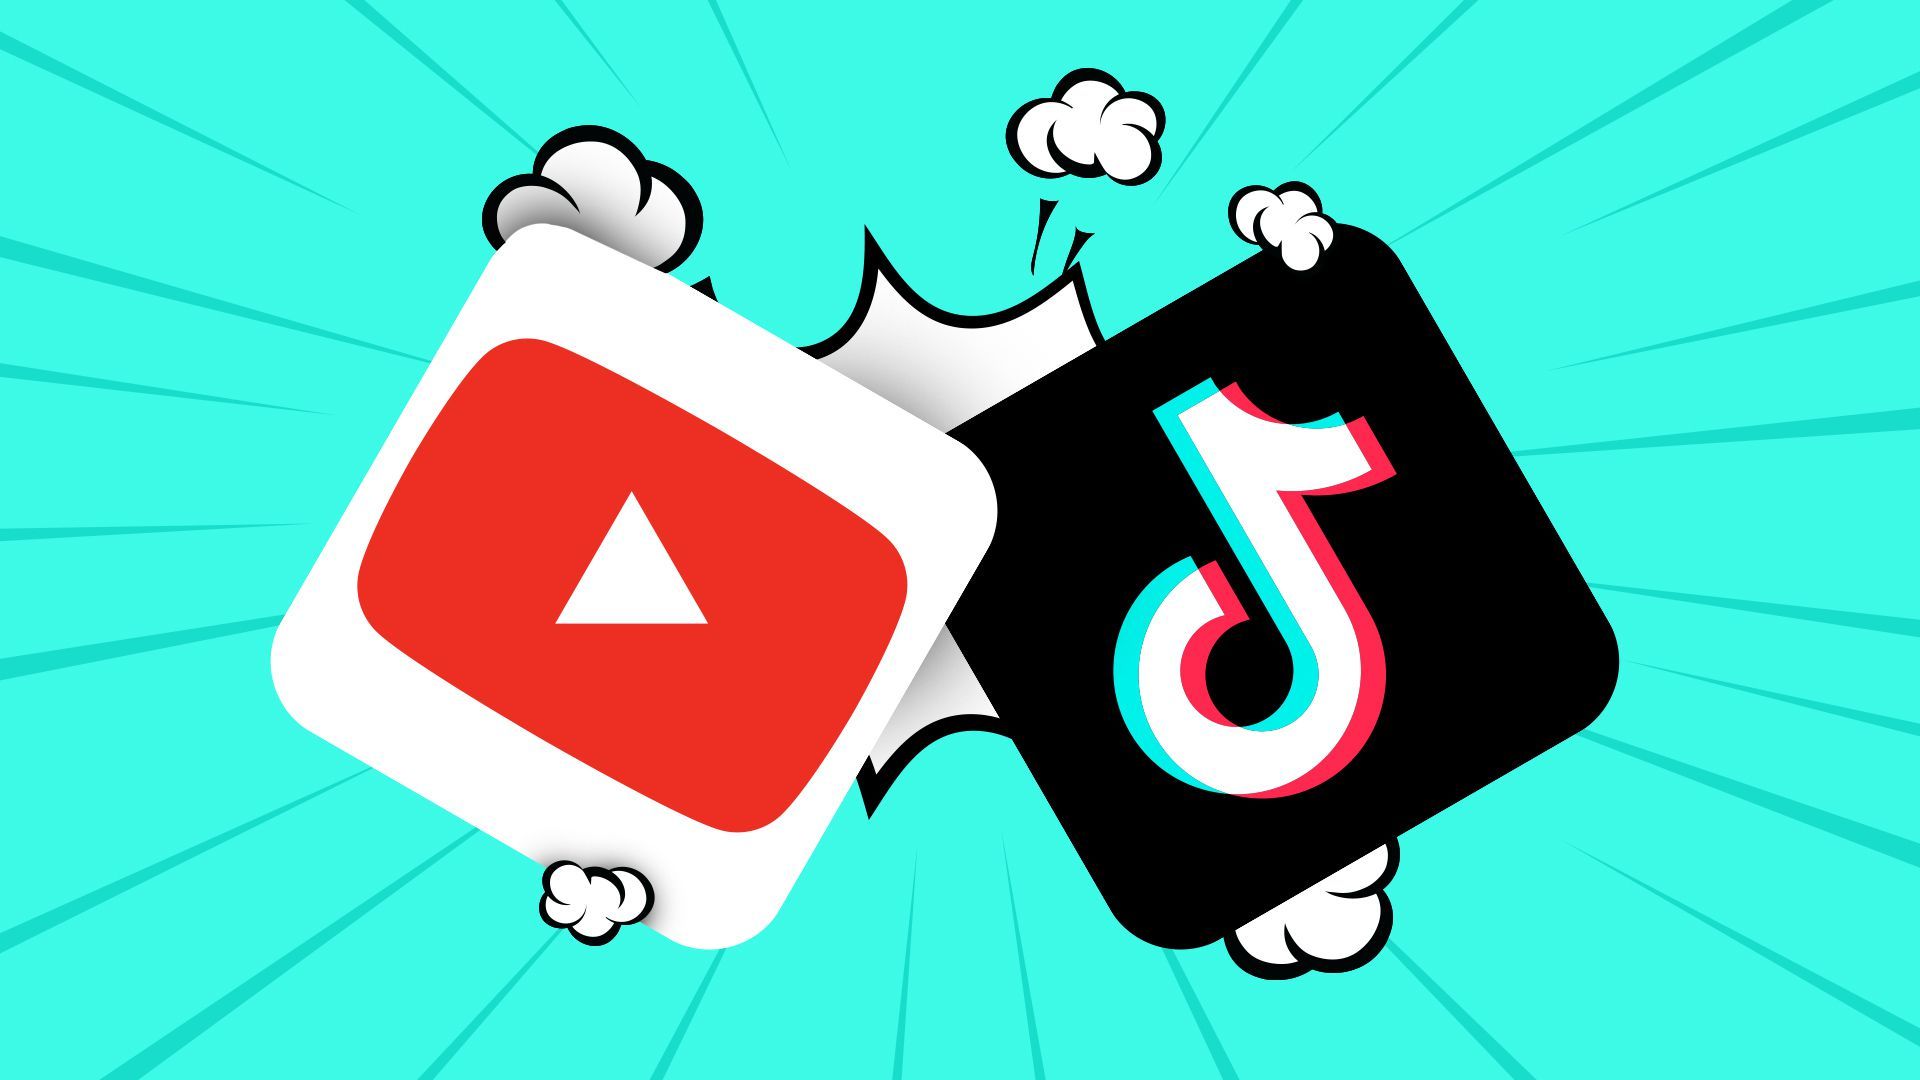 Illustration of the Youtube and TikTok app logos battling in a comic book style. 